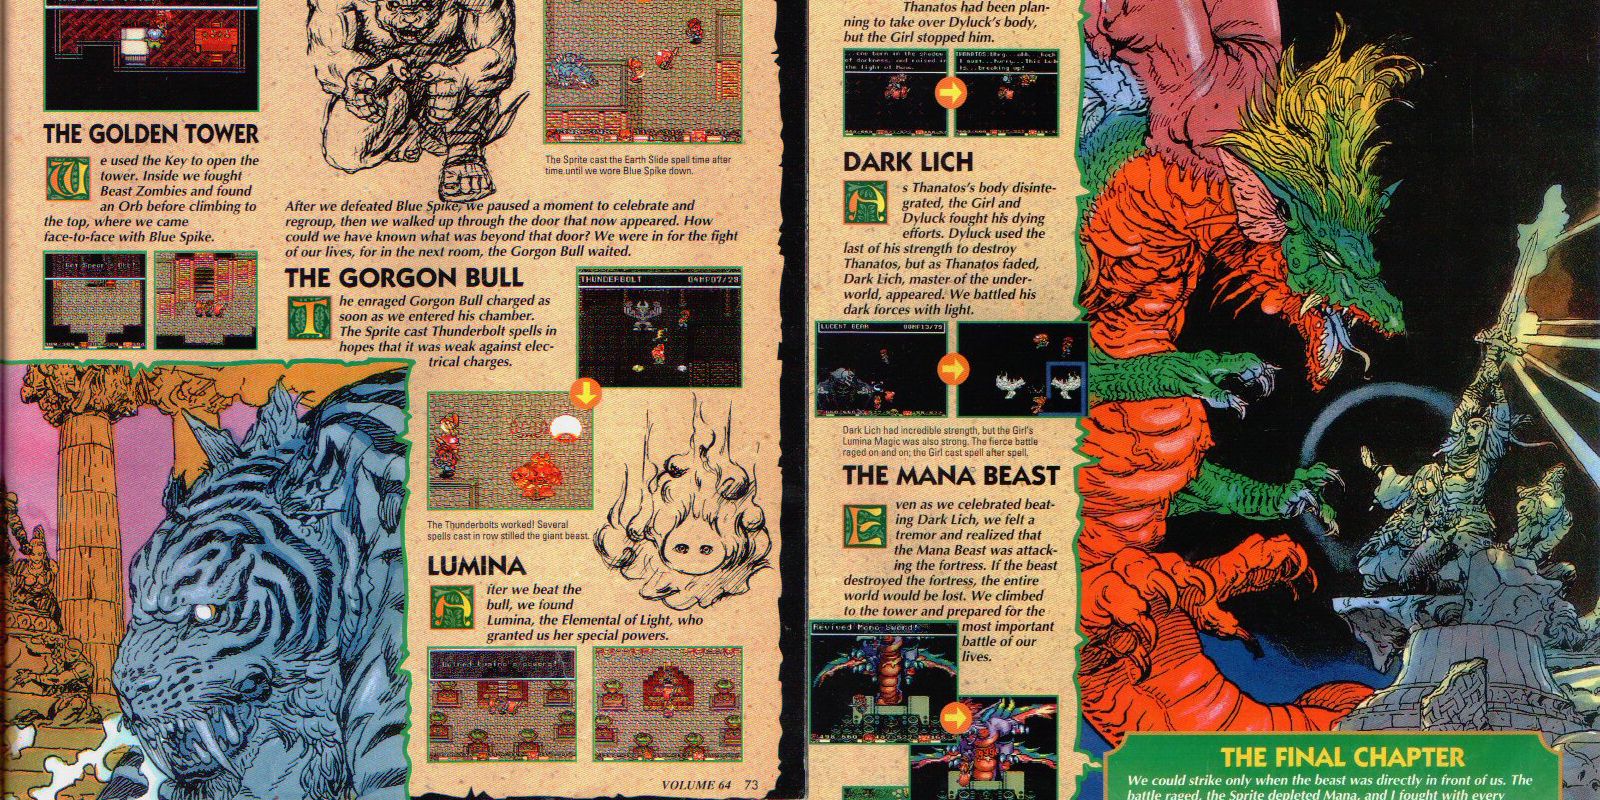 15 Things You Didn’t Know About Secret Of Mana